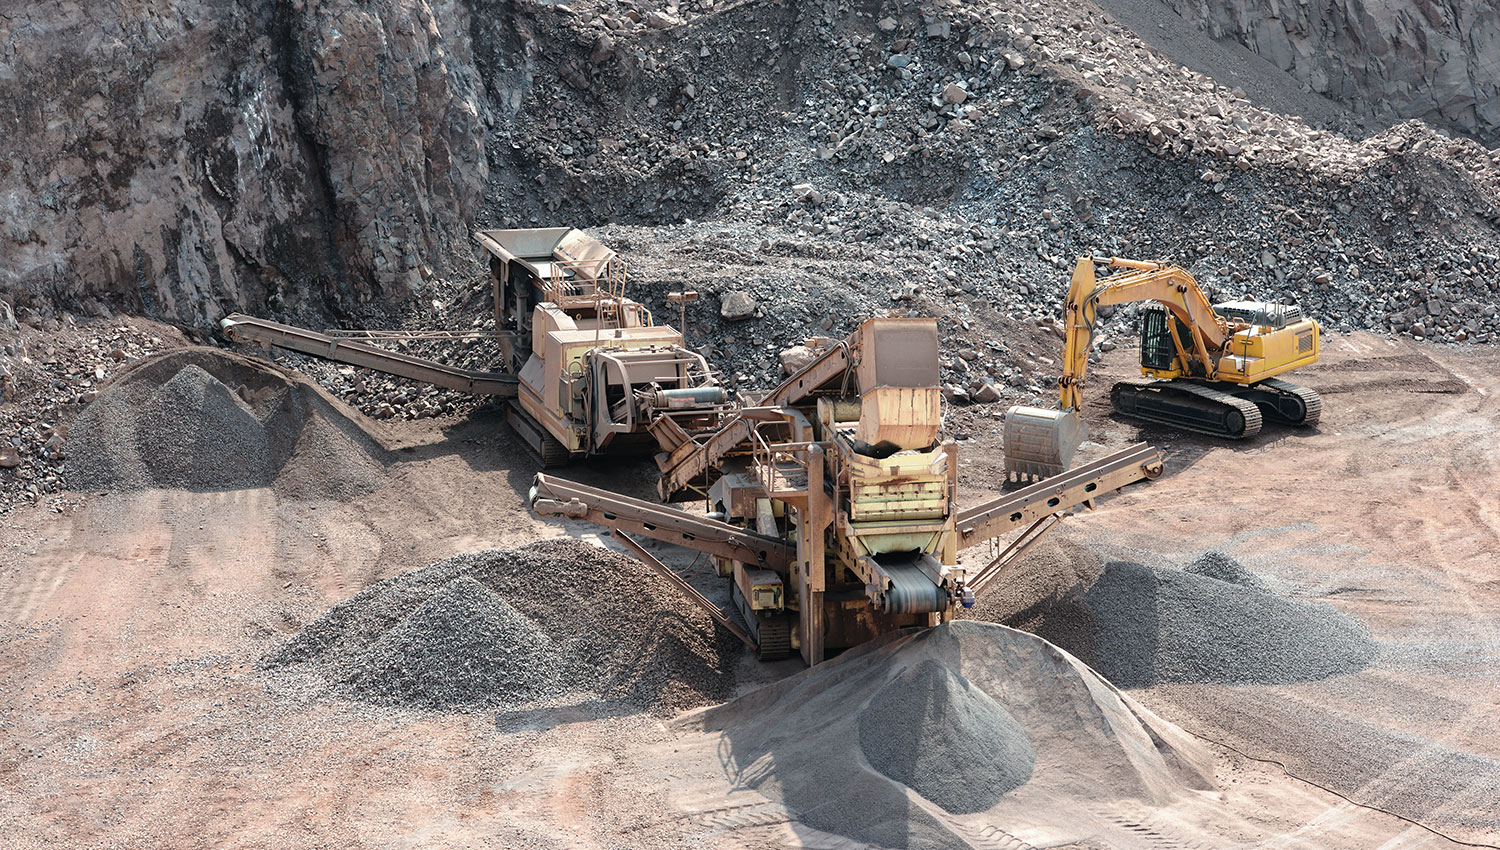 The Main Role of Safety and Security Systems in the Mining Industry